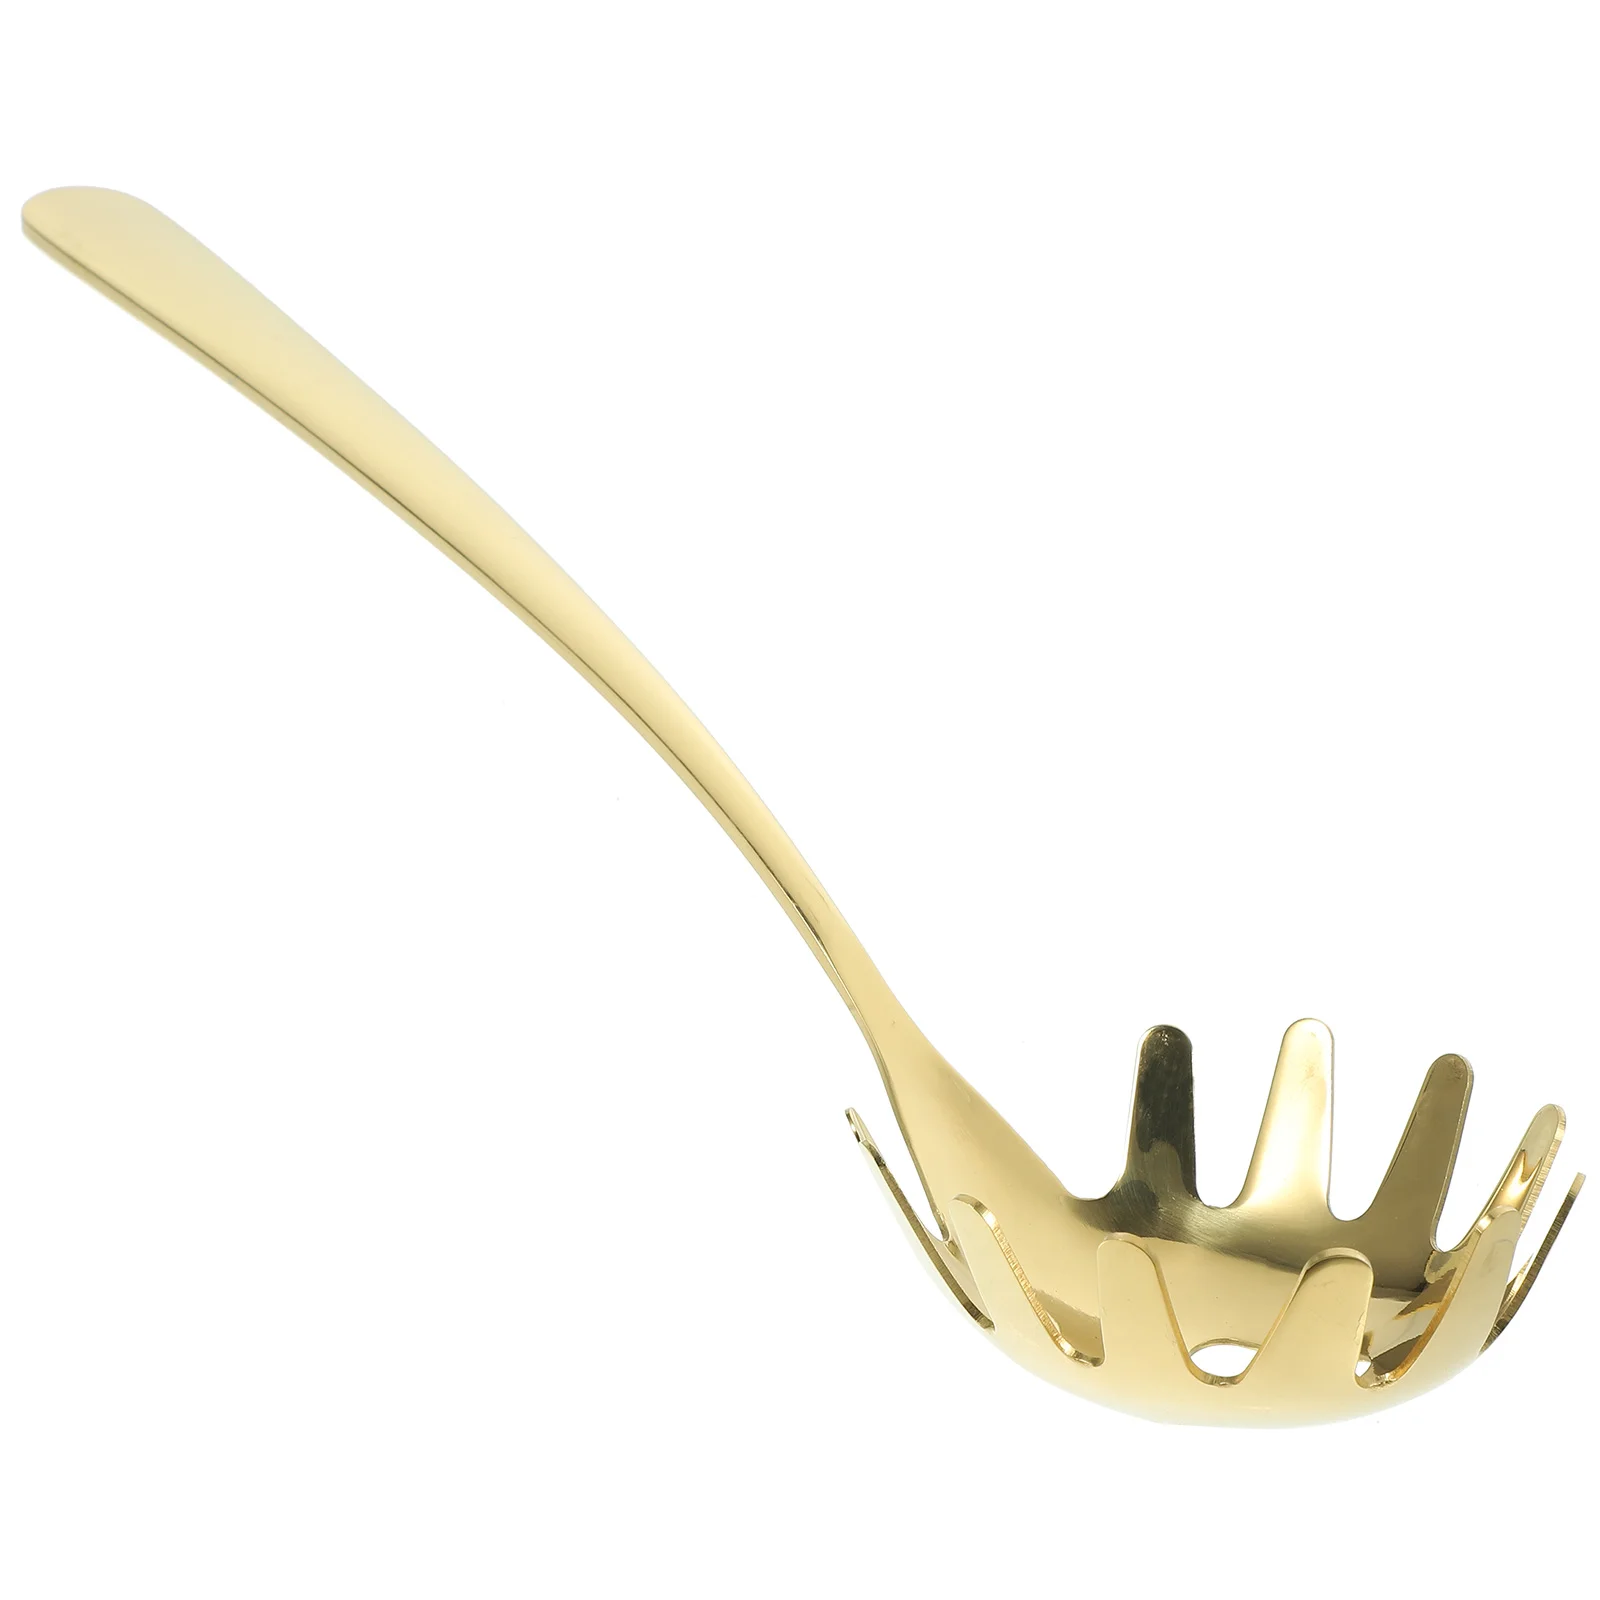 

Pink Shell Spaghetti Spoon Server Pasta Serving Spoons Noodle Strainer Colander Tongs Utensil Filter Stainless Steel